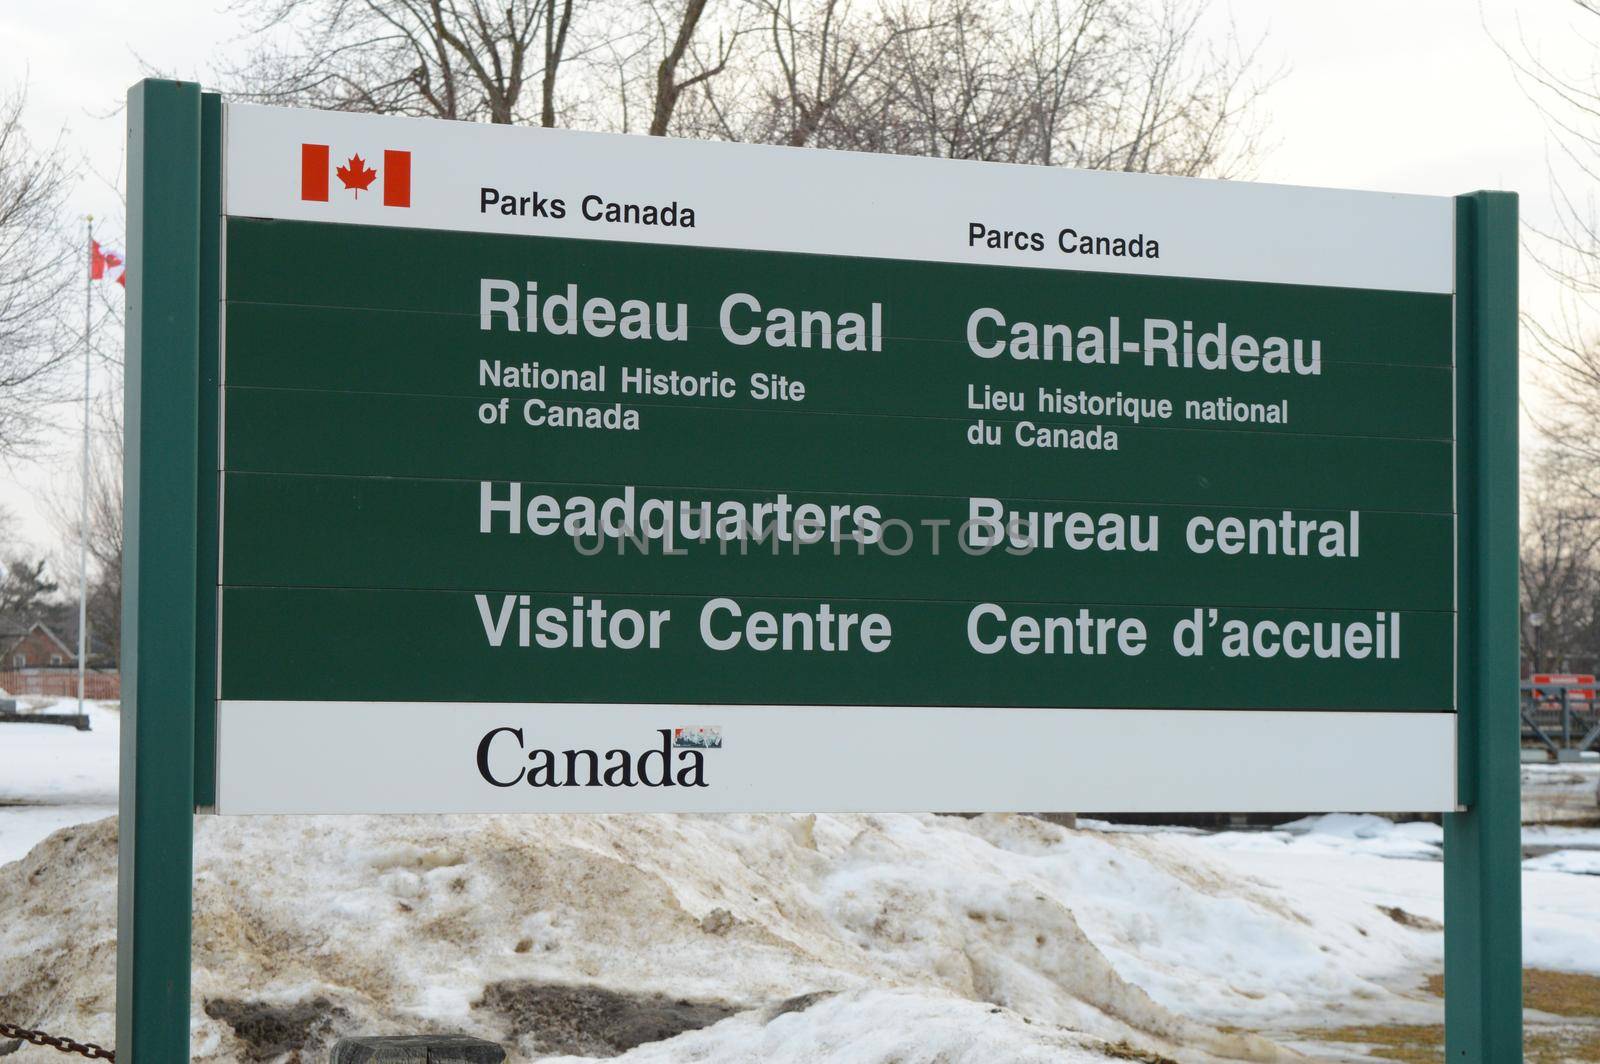 SMITHS FALLS, ONTARIO, CANADA, MARCH 10, 2021: Closeup view of the sign for the Parks Canada Rideau Canal National Historic Site Headquarters Visitor Centre located downtown Smiths Falls, ON, on a late winter afternoon.